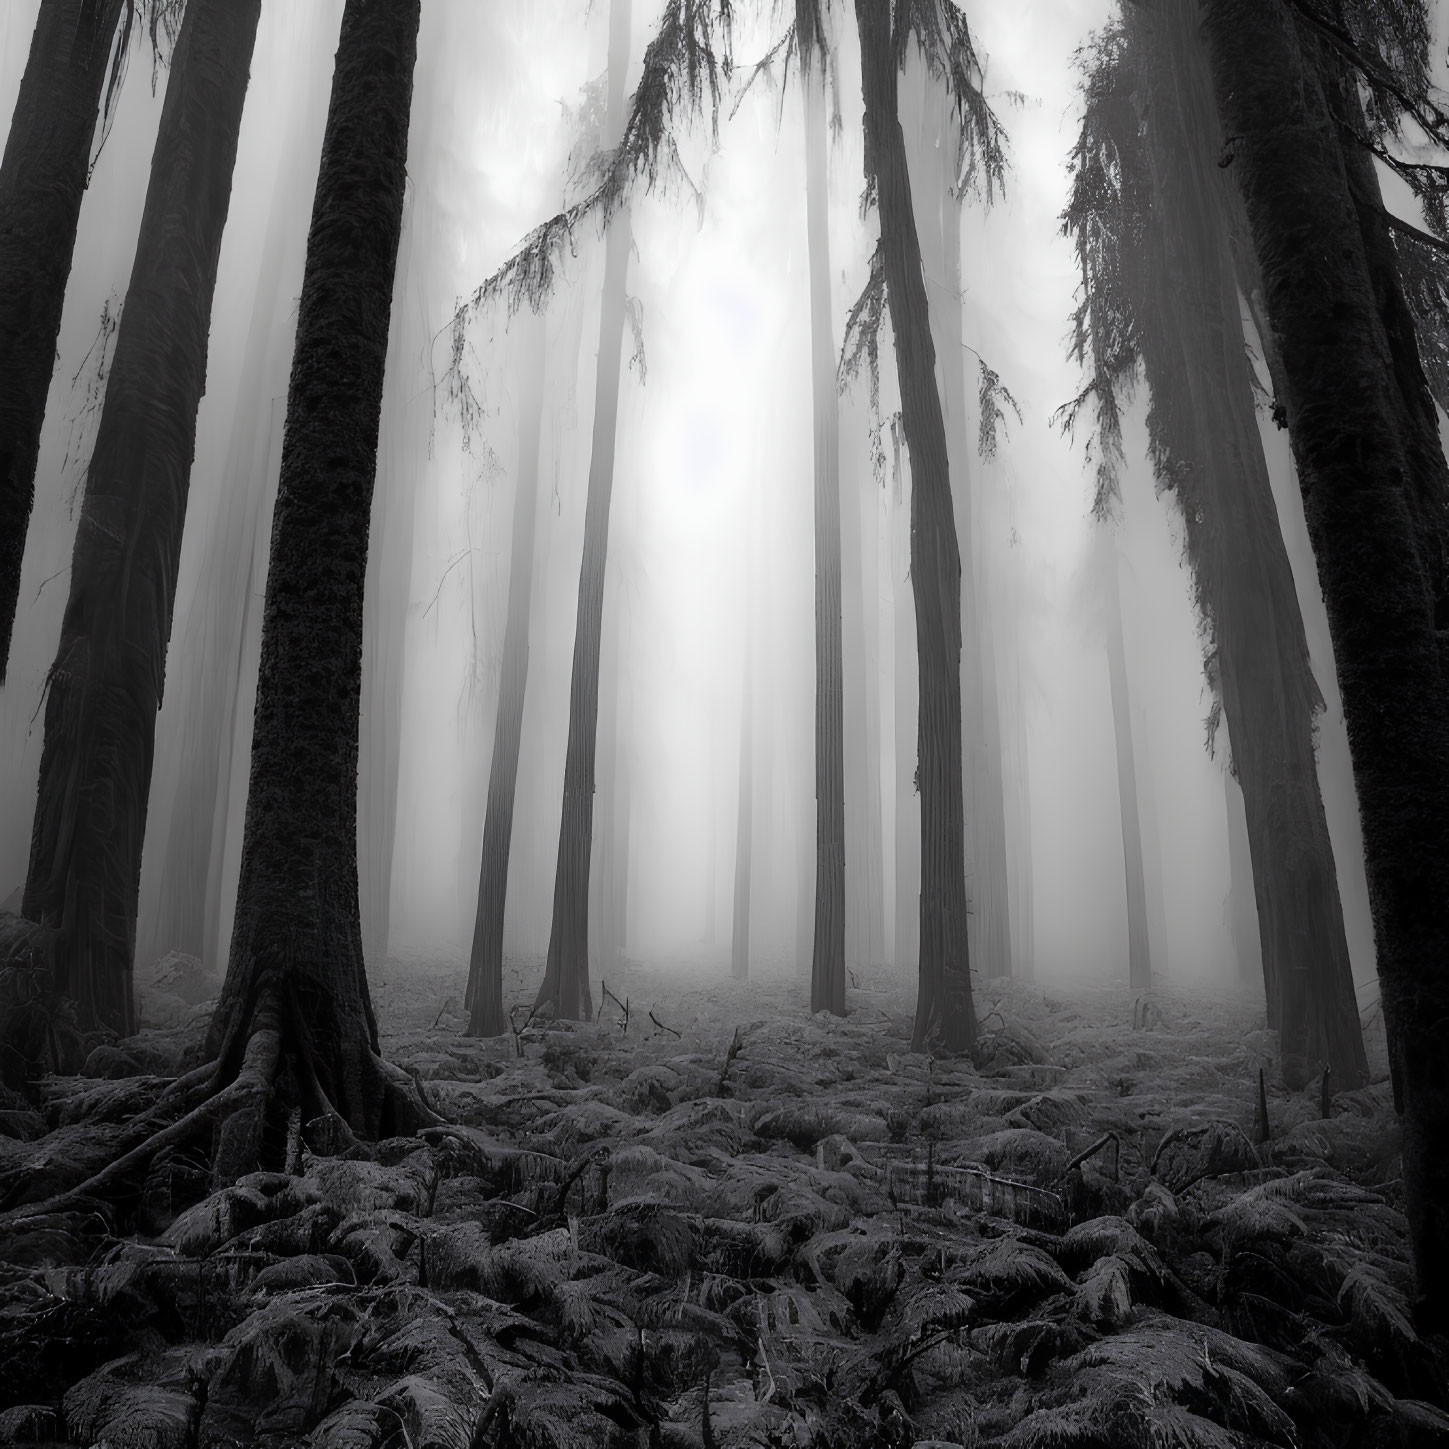 Foggy forest scene with tall trees and fern-covered ground